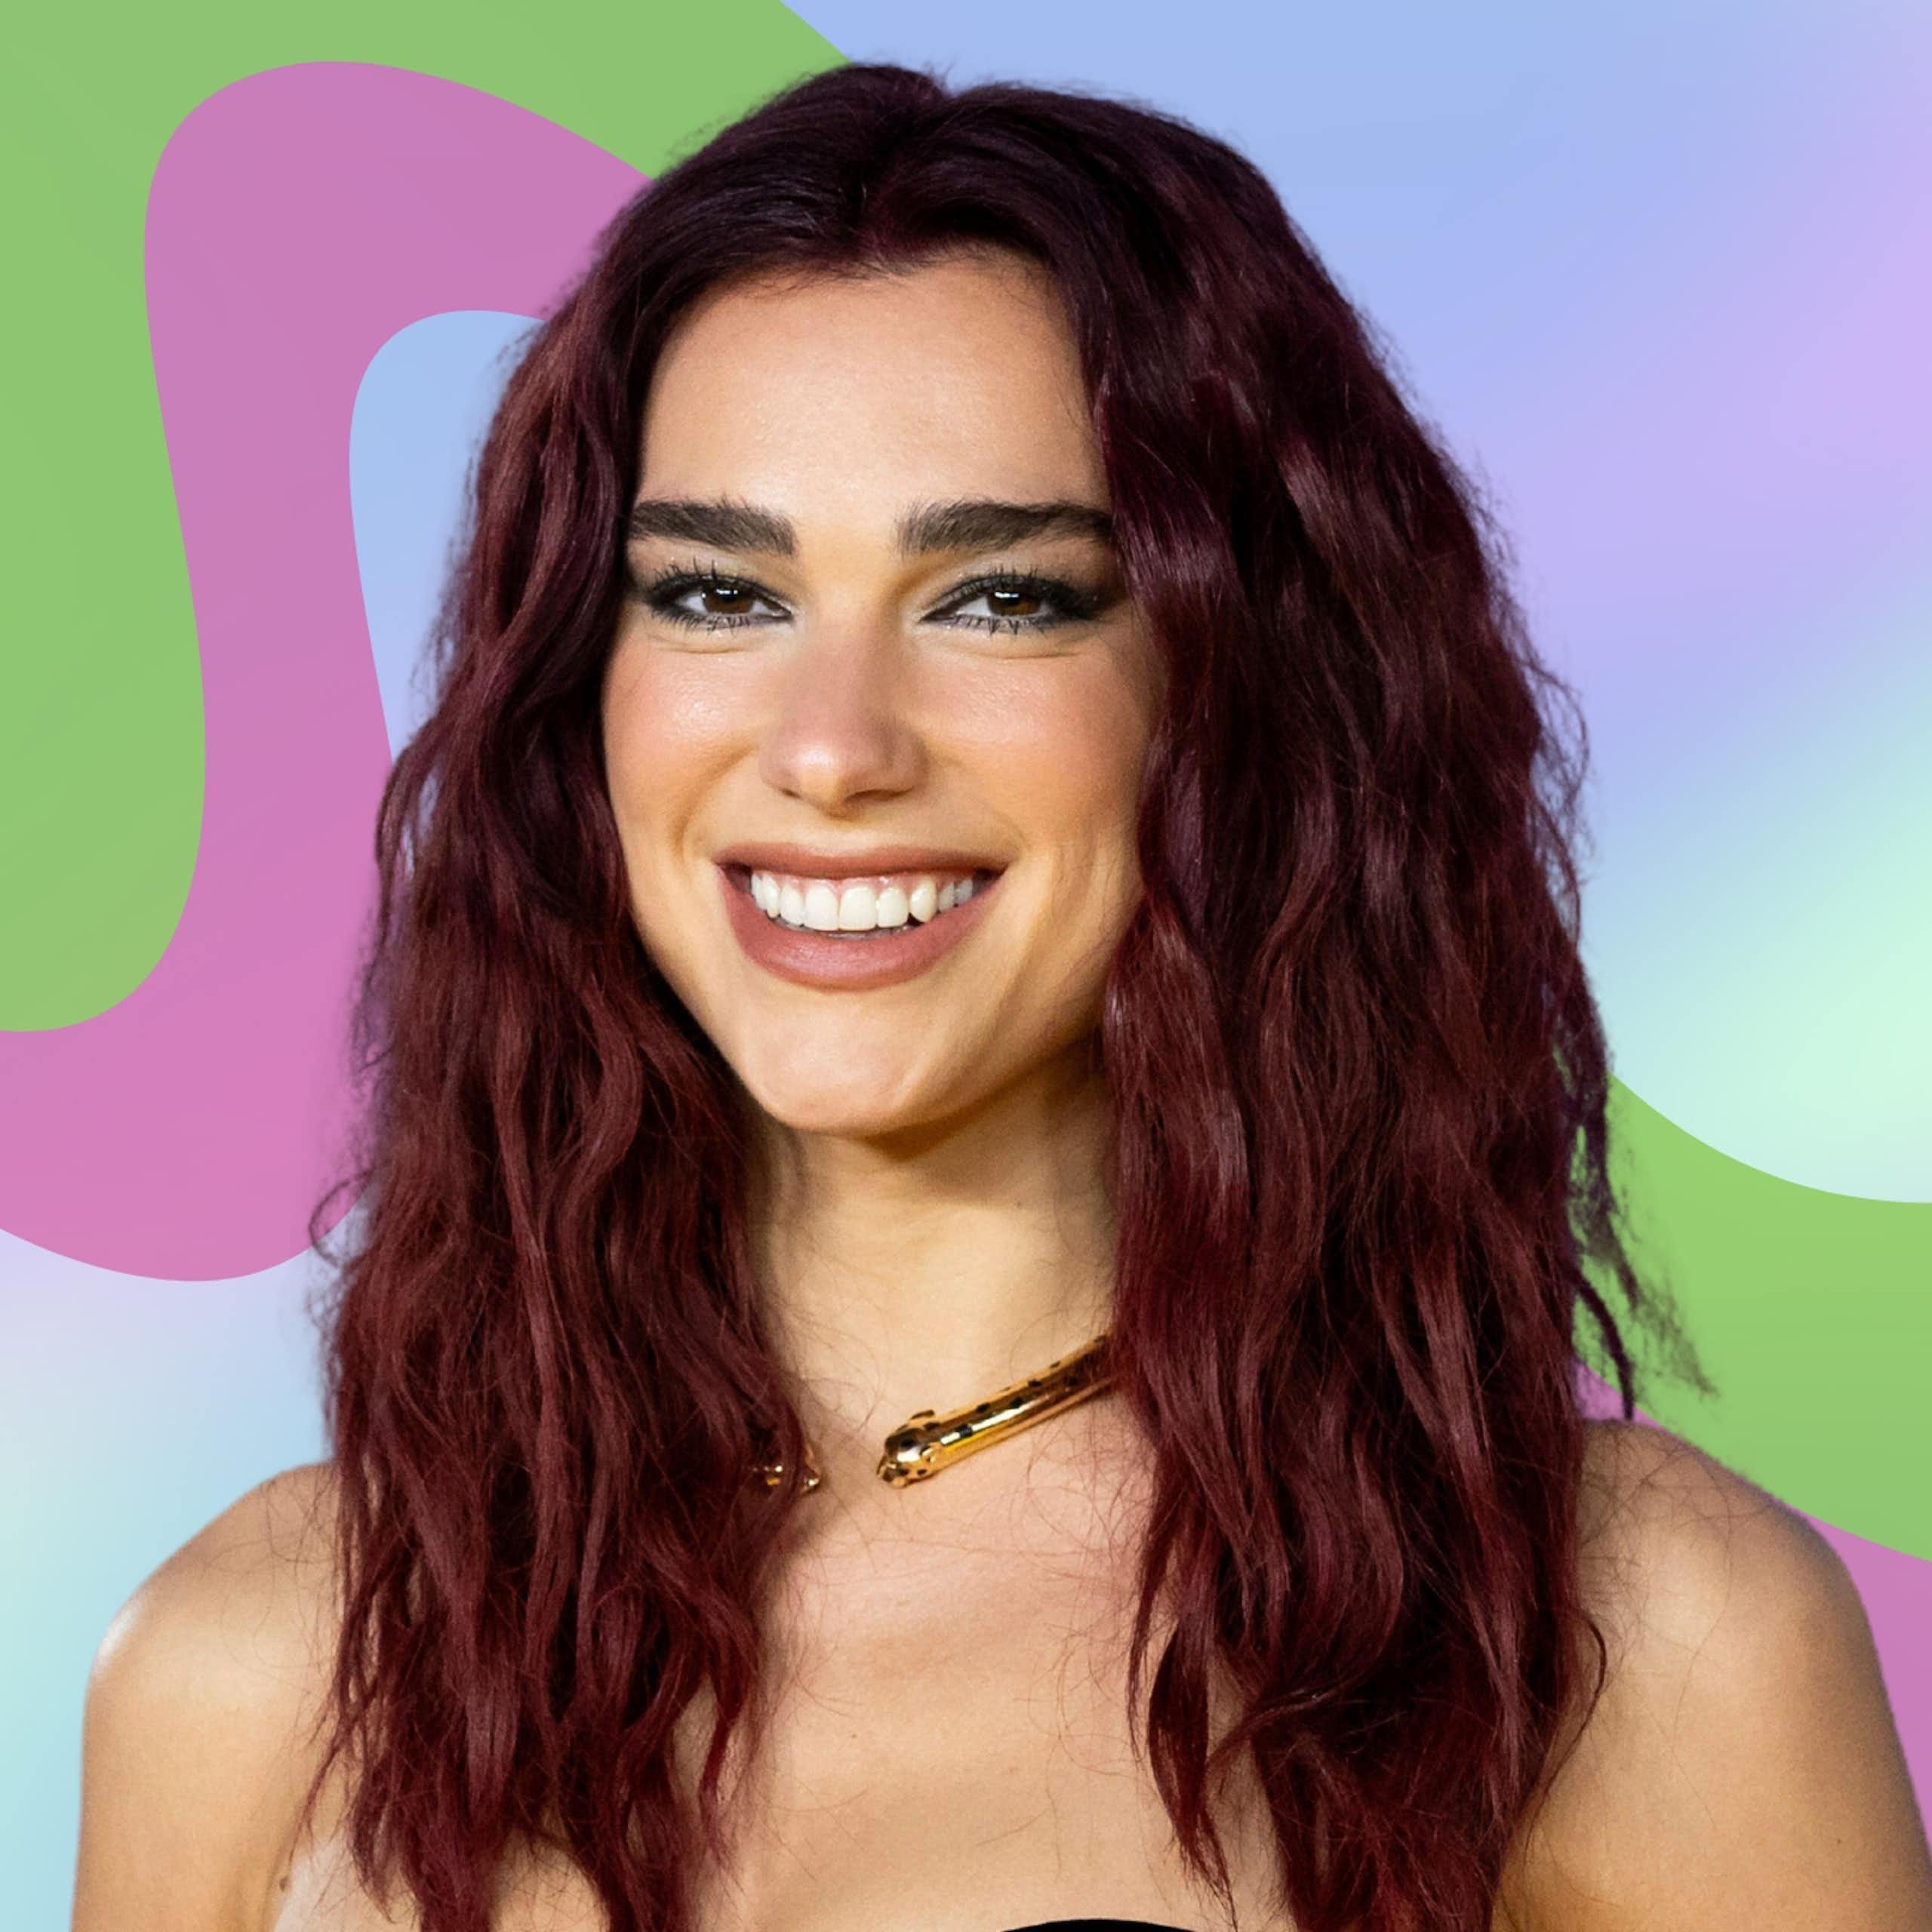 Dua Lipa smiling with a pattern behind her